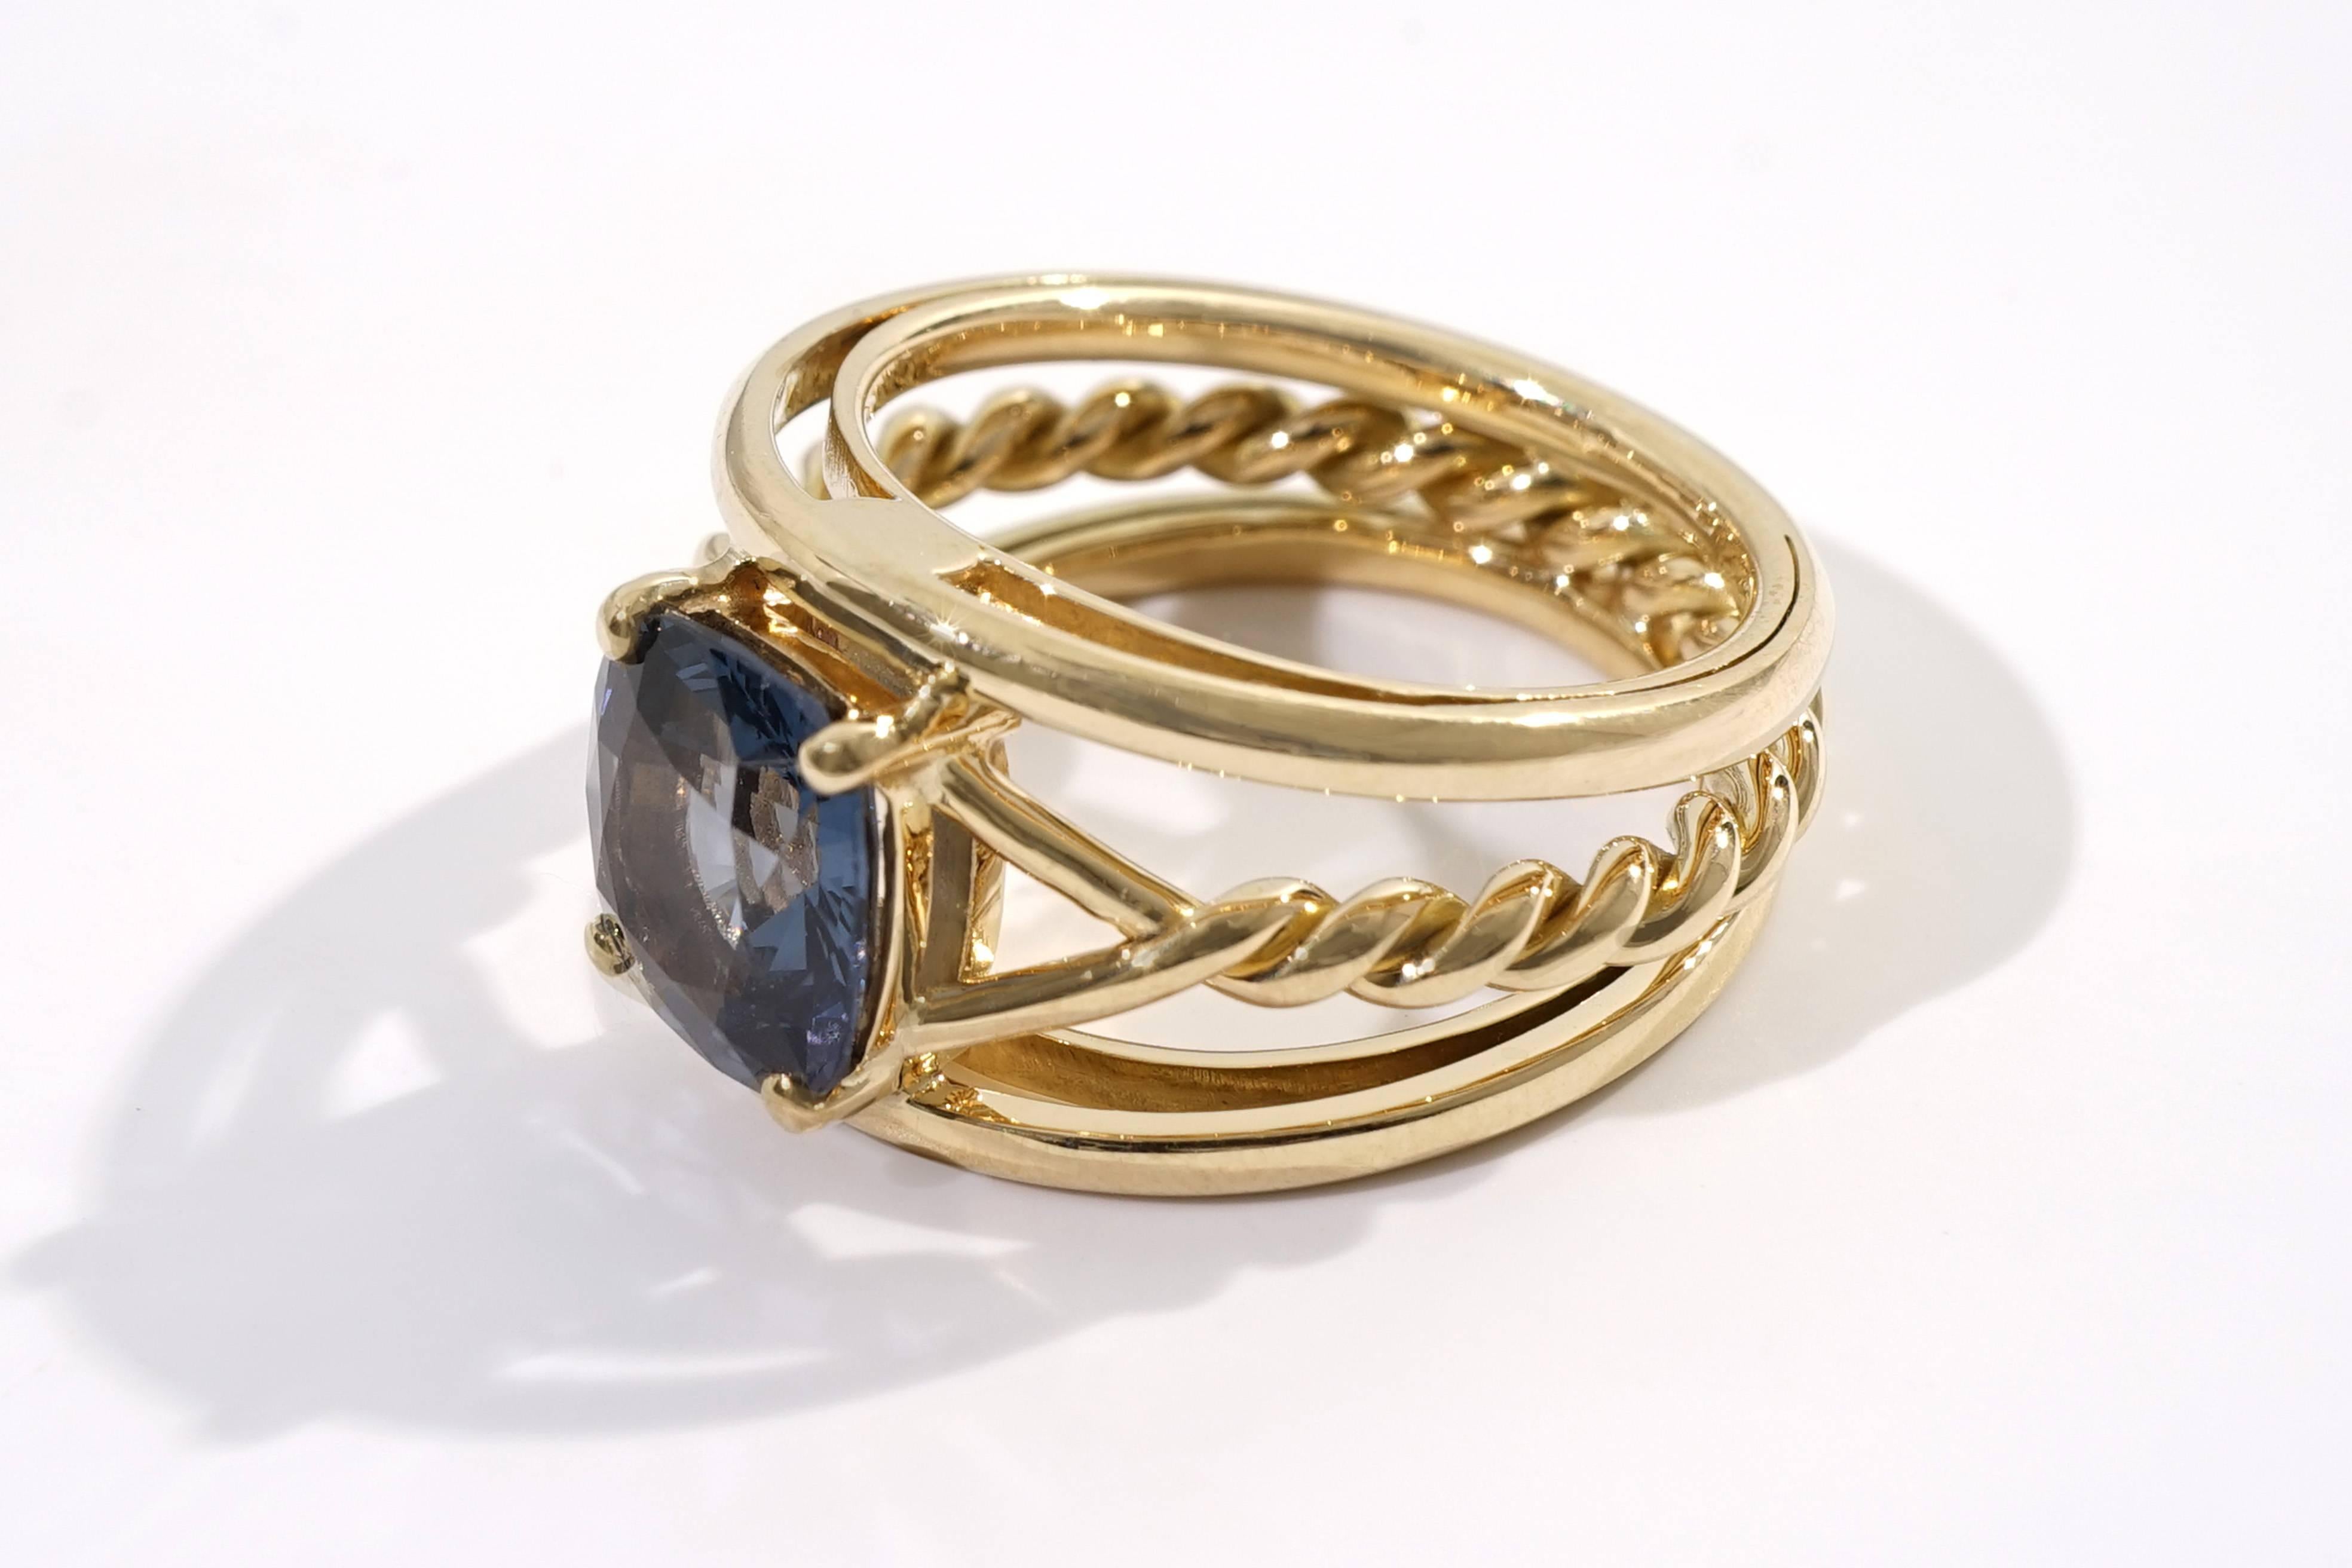 Coralie Van Caloen 18 Carat Yellow Gold Blue Spinel Band Ring is entirely hand made and forged in Belgium by experts goldsmiths therefore it is a very unique piece. The Spinel has a rare, natural blue colour and is mounted on an elegant 'torsade'